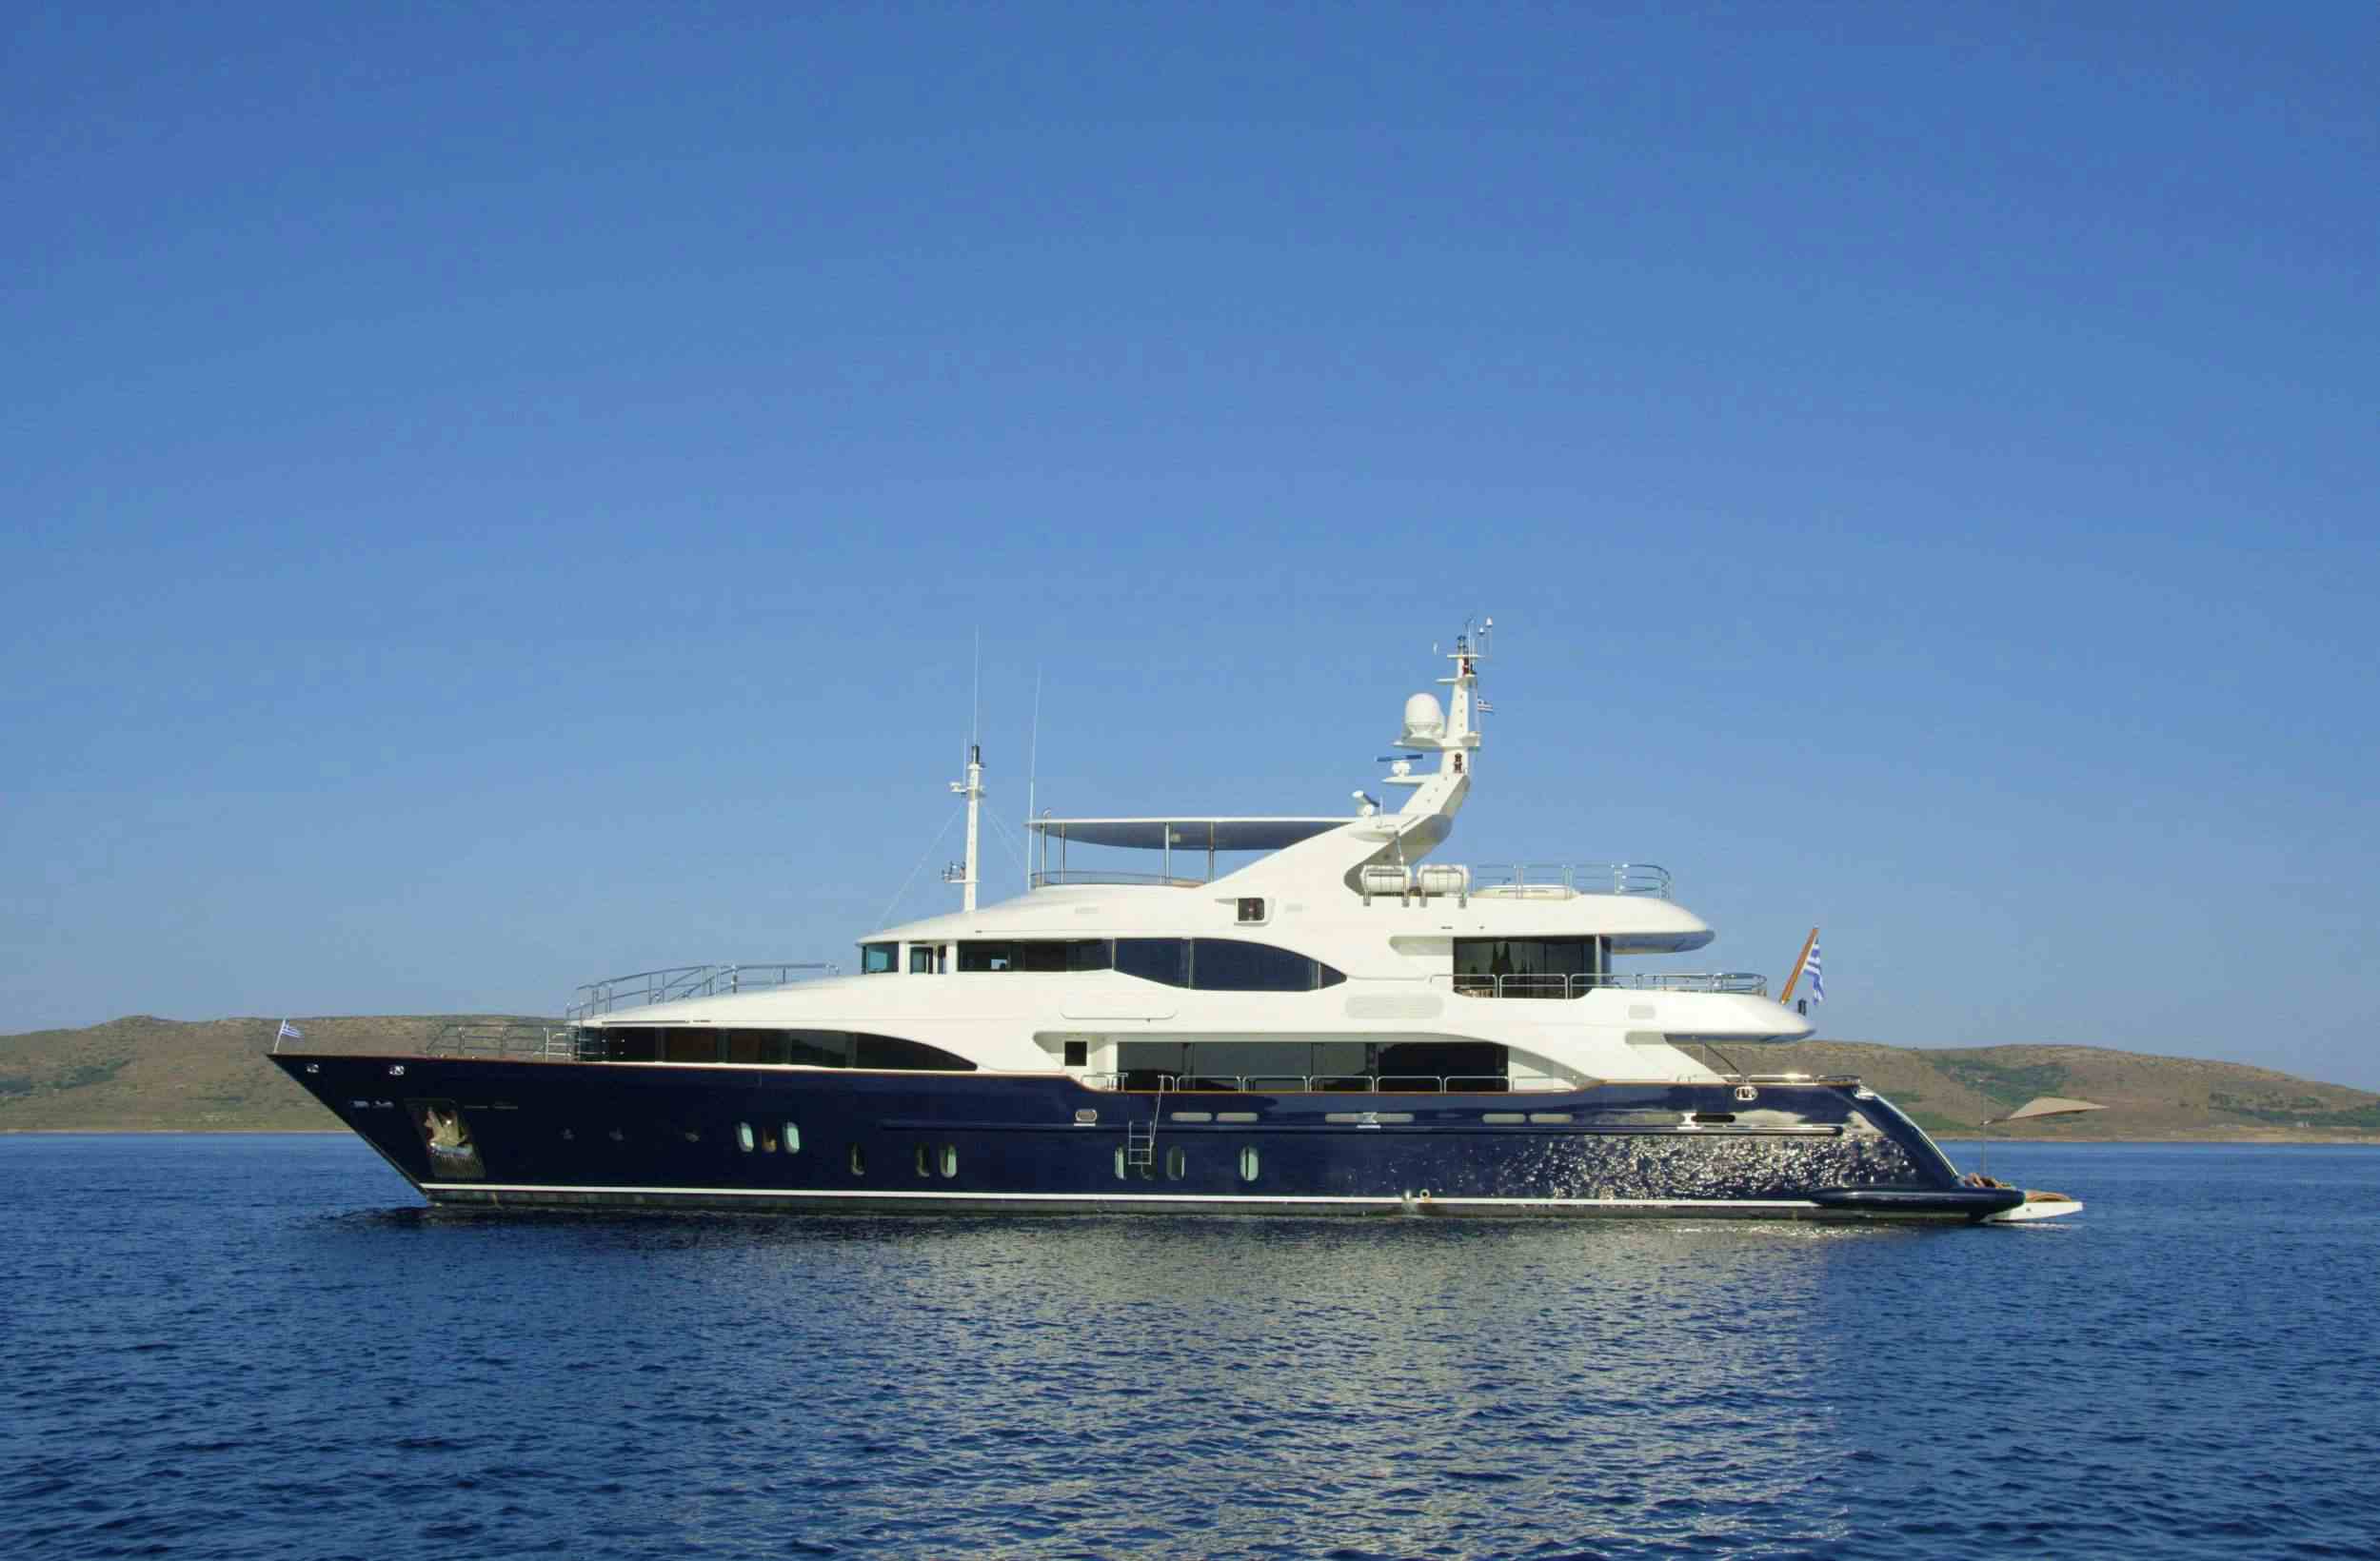 GRANDE AMORE - Yacht Charter France & Boat hire in Summer: W. Med -Naples/Sicily, Greece, W. Med -Riviera/Cors/Sard., Turkey, W. Med - Spain/Balearics, Croatia | Winter: Indian Ocean and SE Asia, Red Sea, United Arab Emirates 1